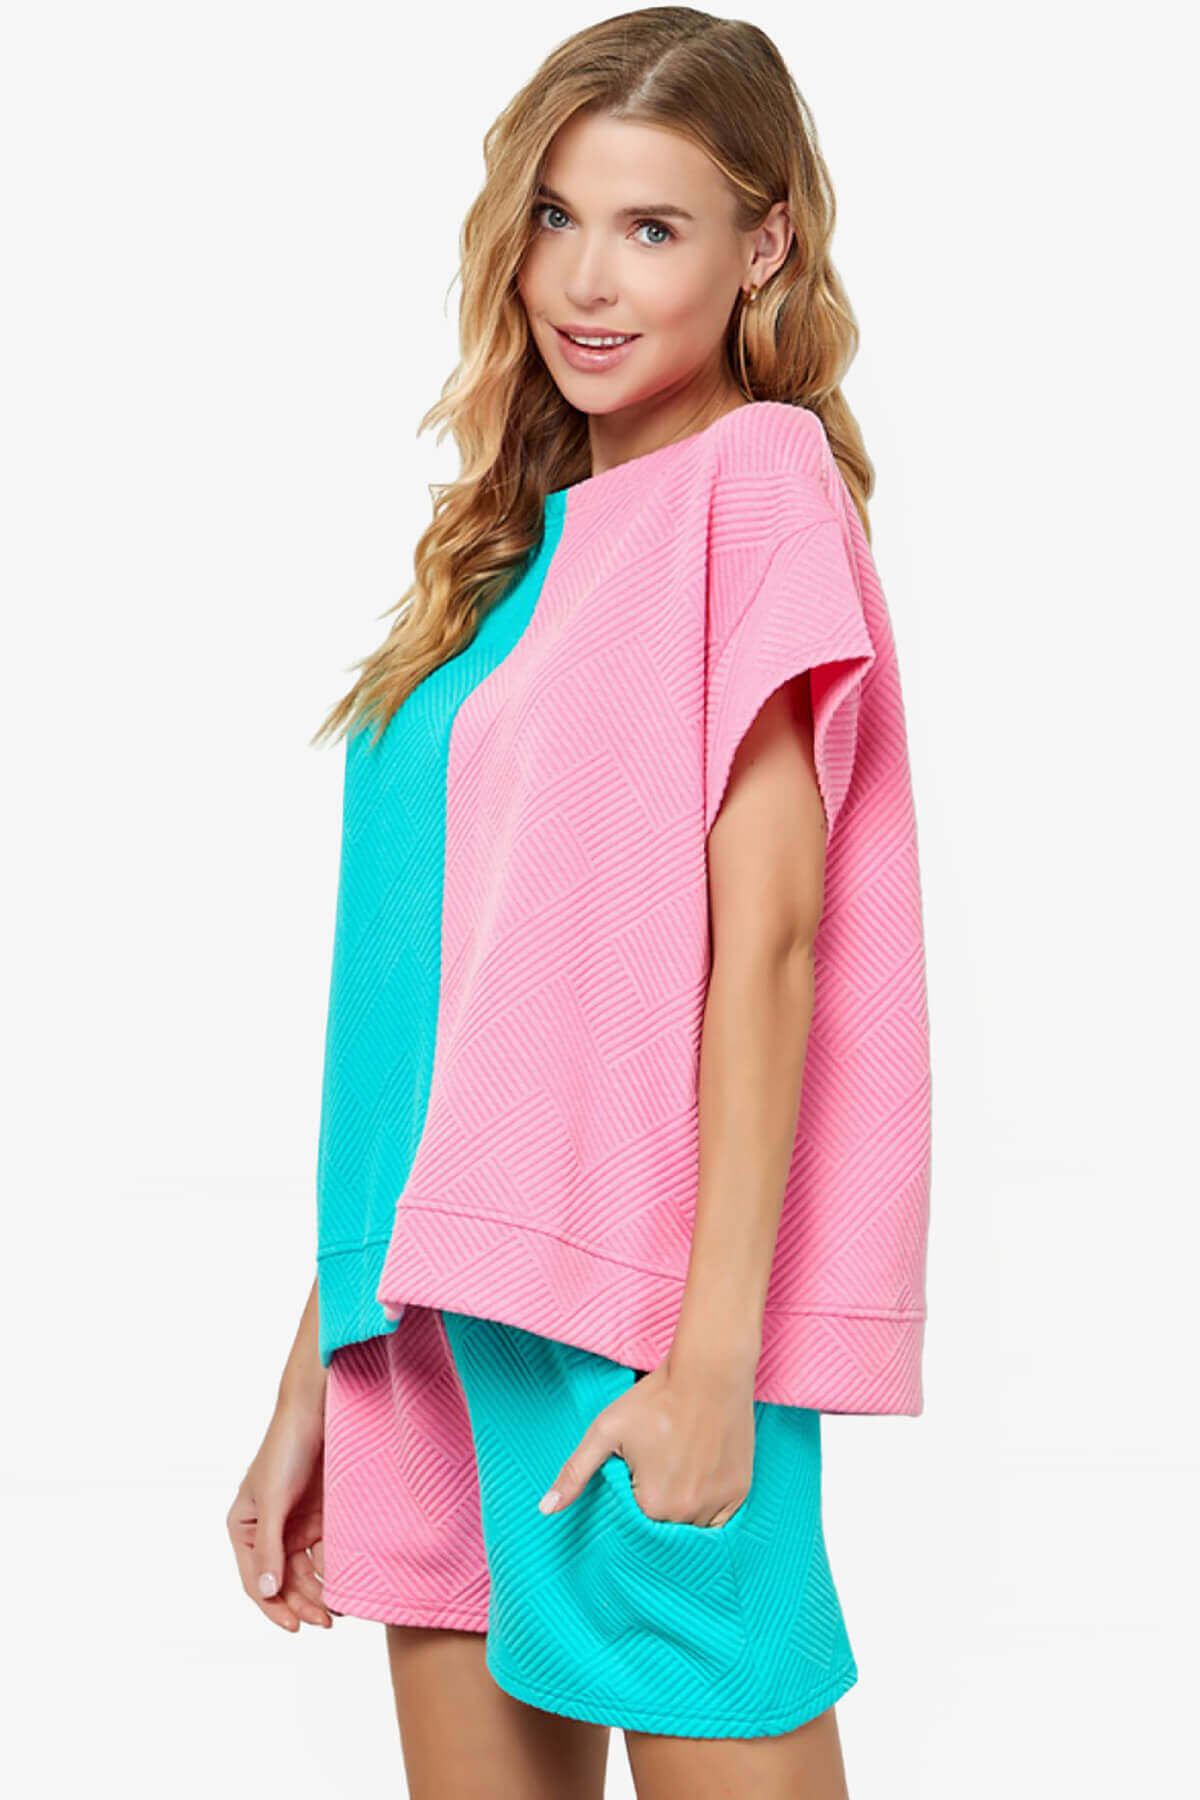 Load image into Gallery viewer, Lassy Textured Colorblock Short Sleeve Top PINK AND BLUE_4
